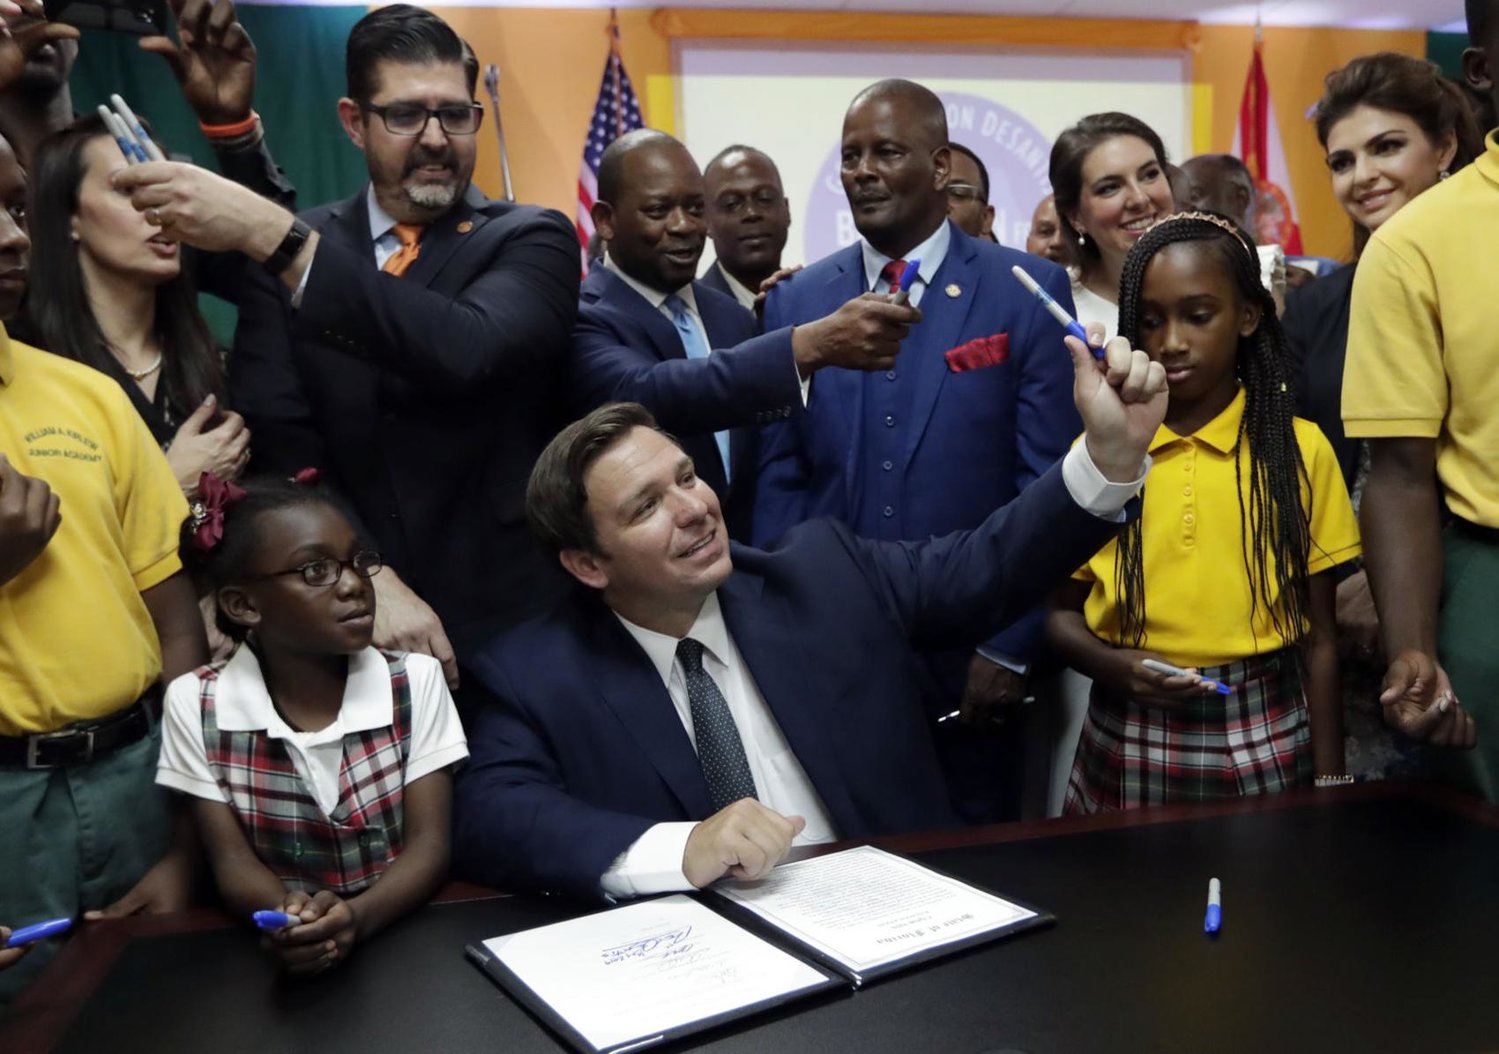 Florida Gov. Ron DeSantis, center, passes out pens used to sign a bill during a signing ceremony at the William J. Kirlew Junior Academy, Thursday, May 9, 2019, in Miami Gardens, Fla. The bill creates a new voucher program for thousands of students to attend private and religious schools using taxpayer dollars traditionally spent on public schools. At left is Sen. Manny Diaz, Jr.
Lynne Sladky / AP